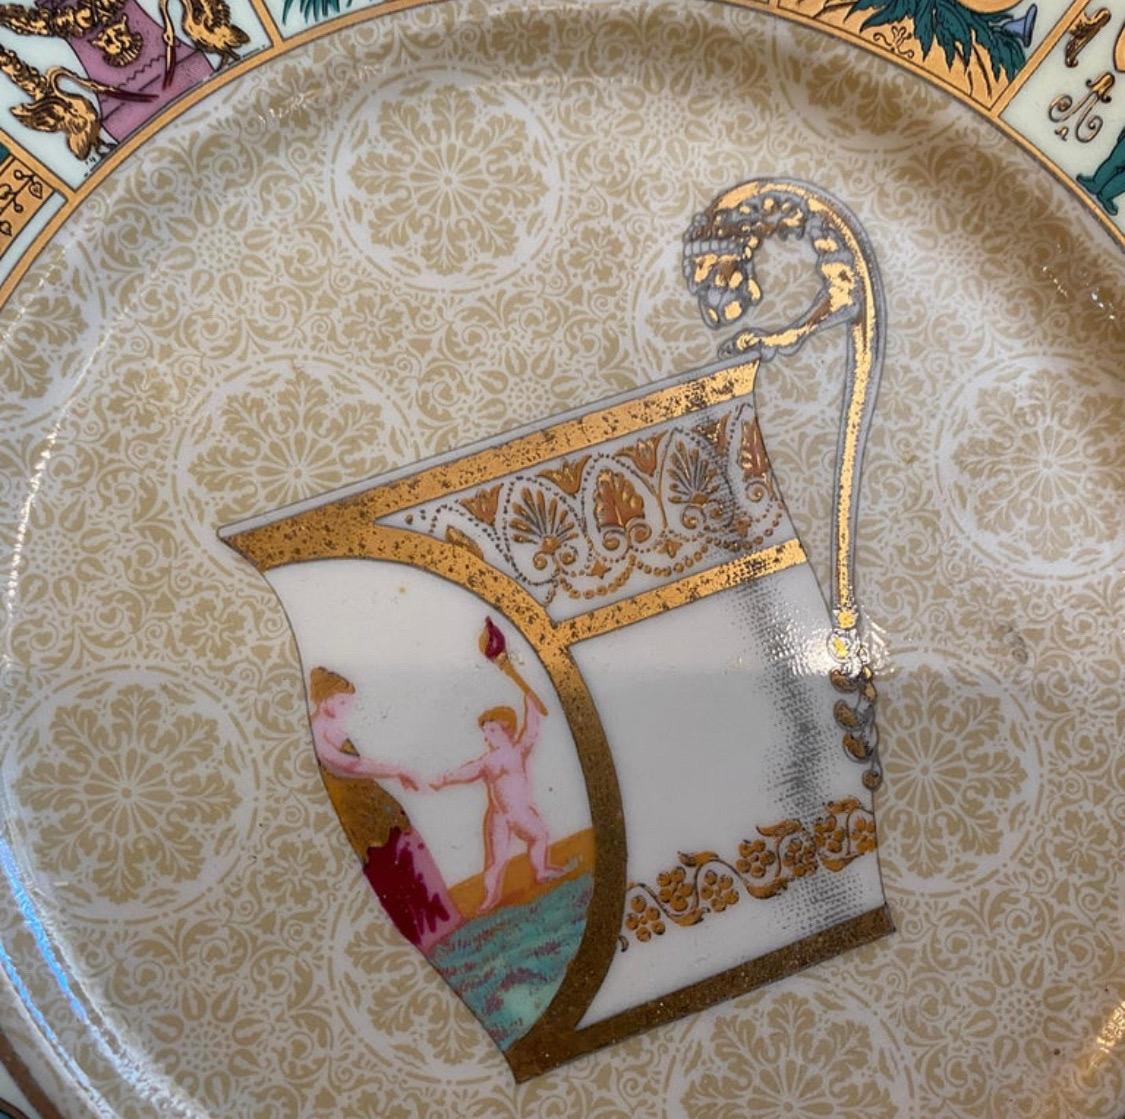 A 1980s Amazing Set of Four Porcelain Italian Mural Plates by Gucci For Sale 3